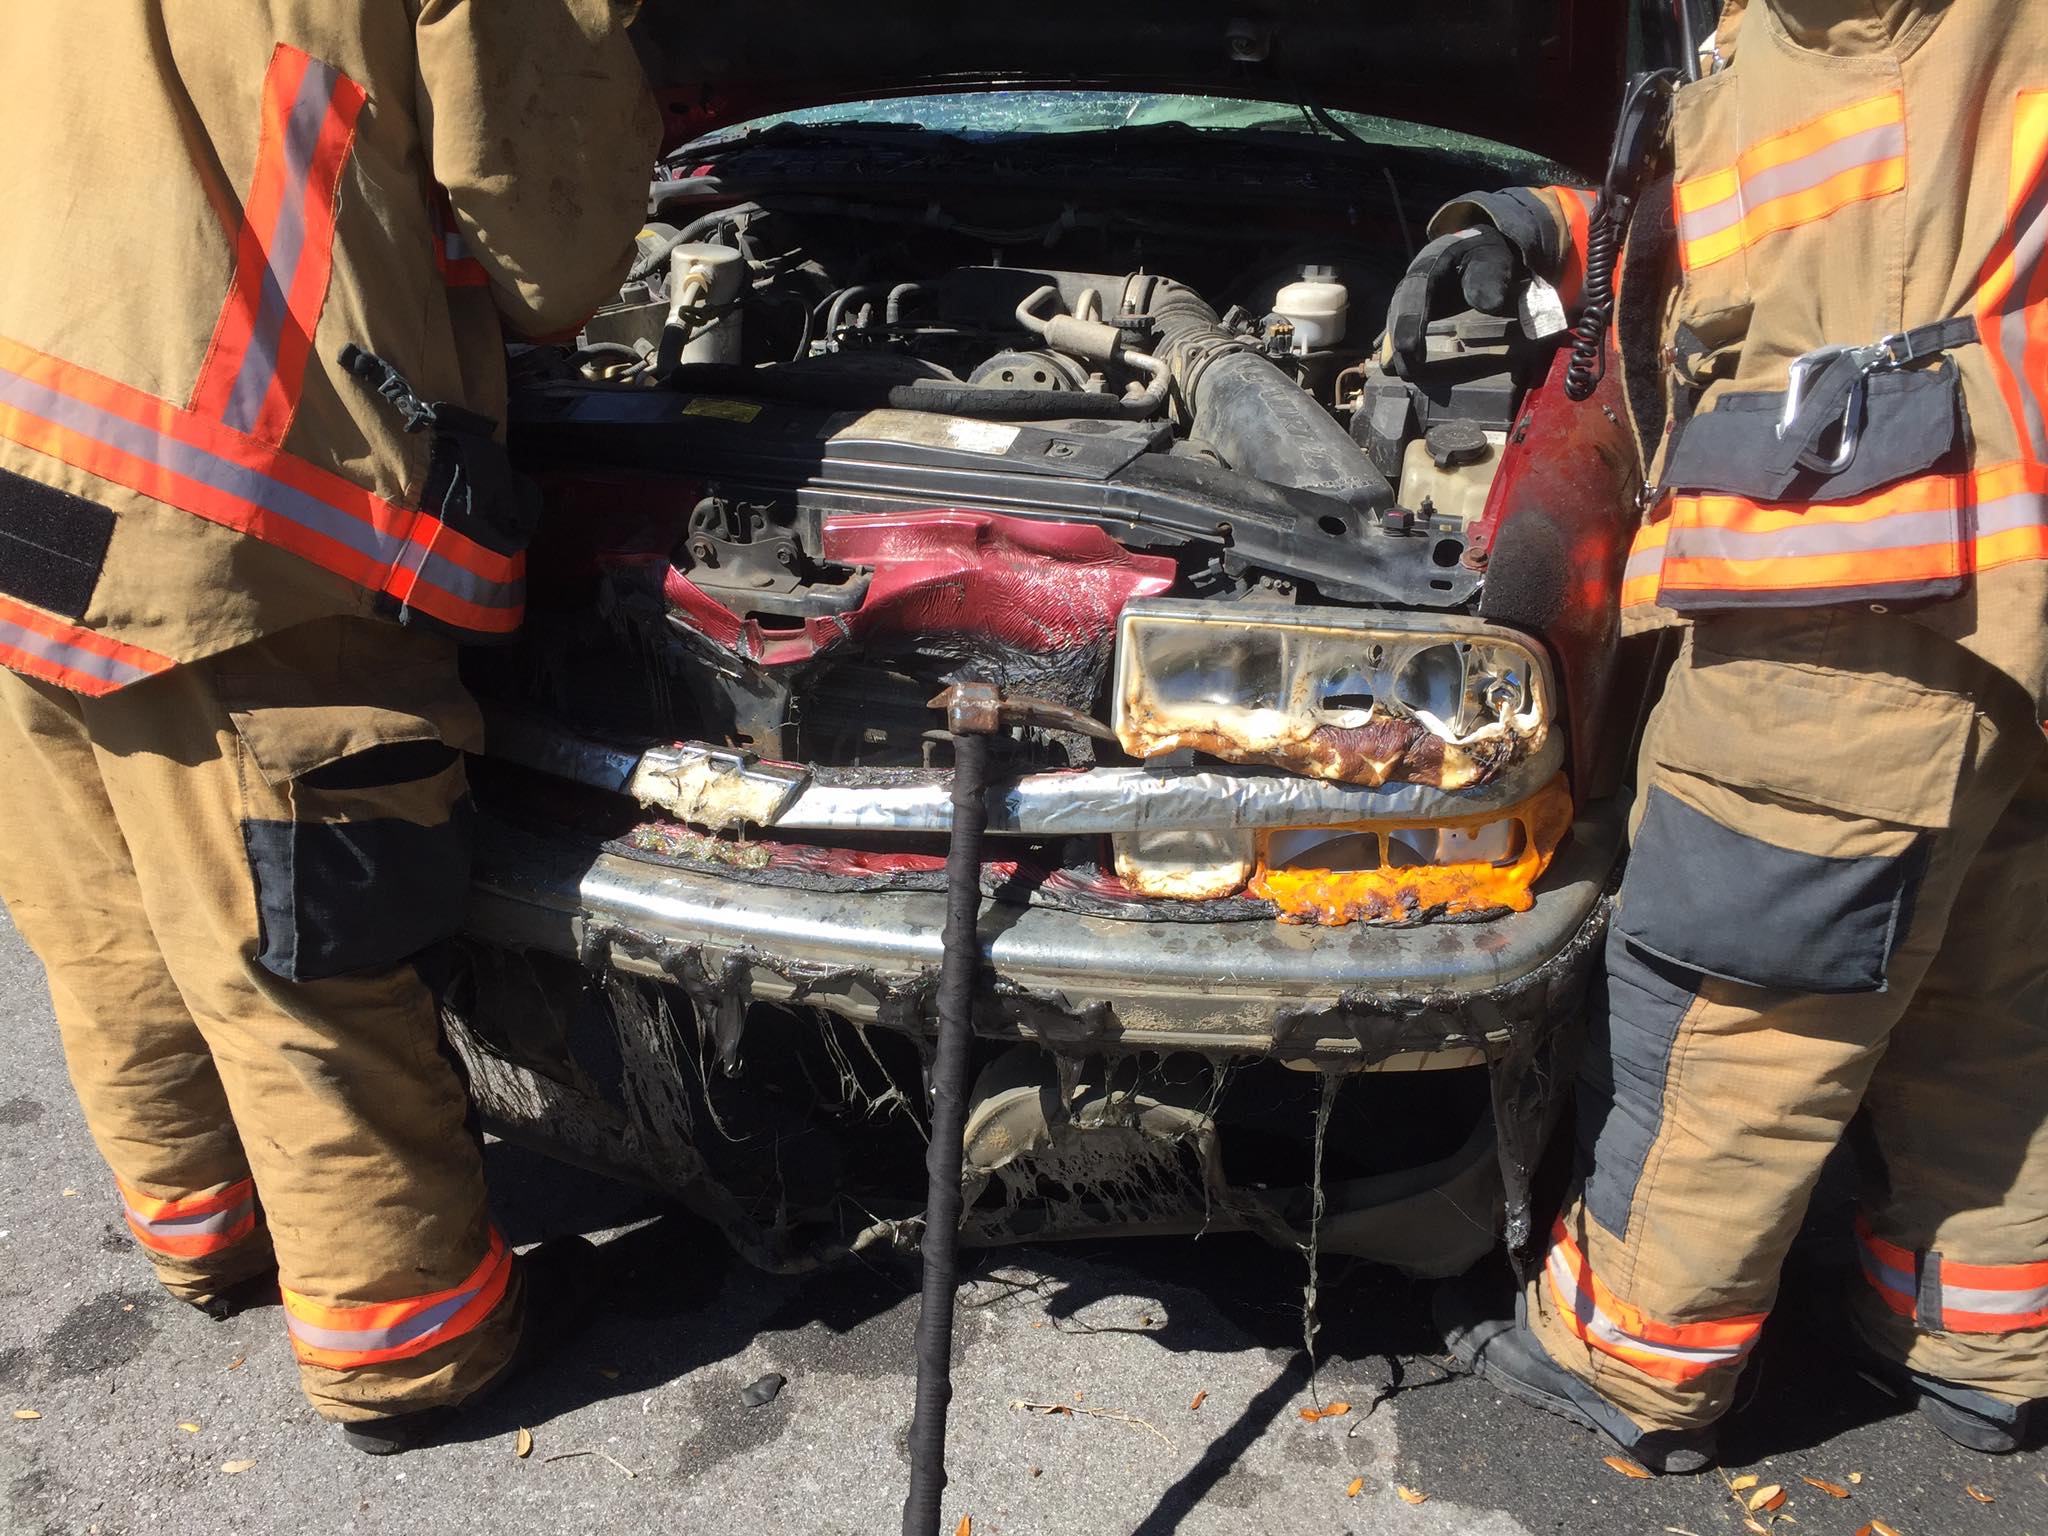 Fire-damaged car being investigated